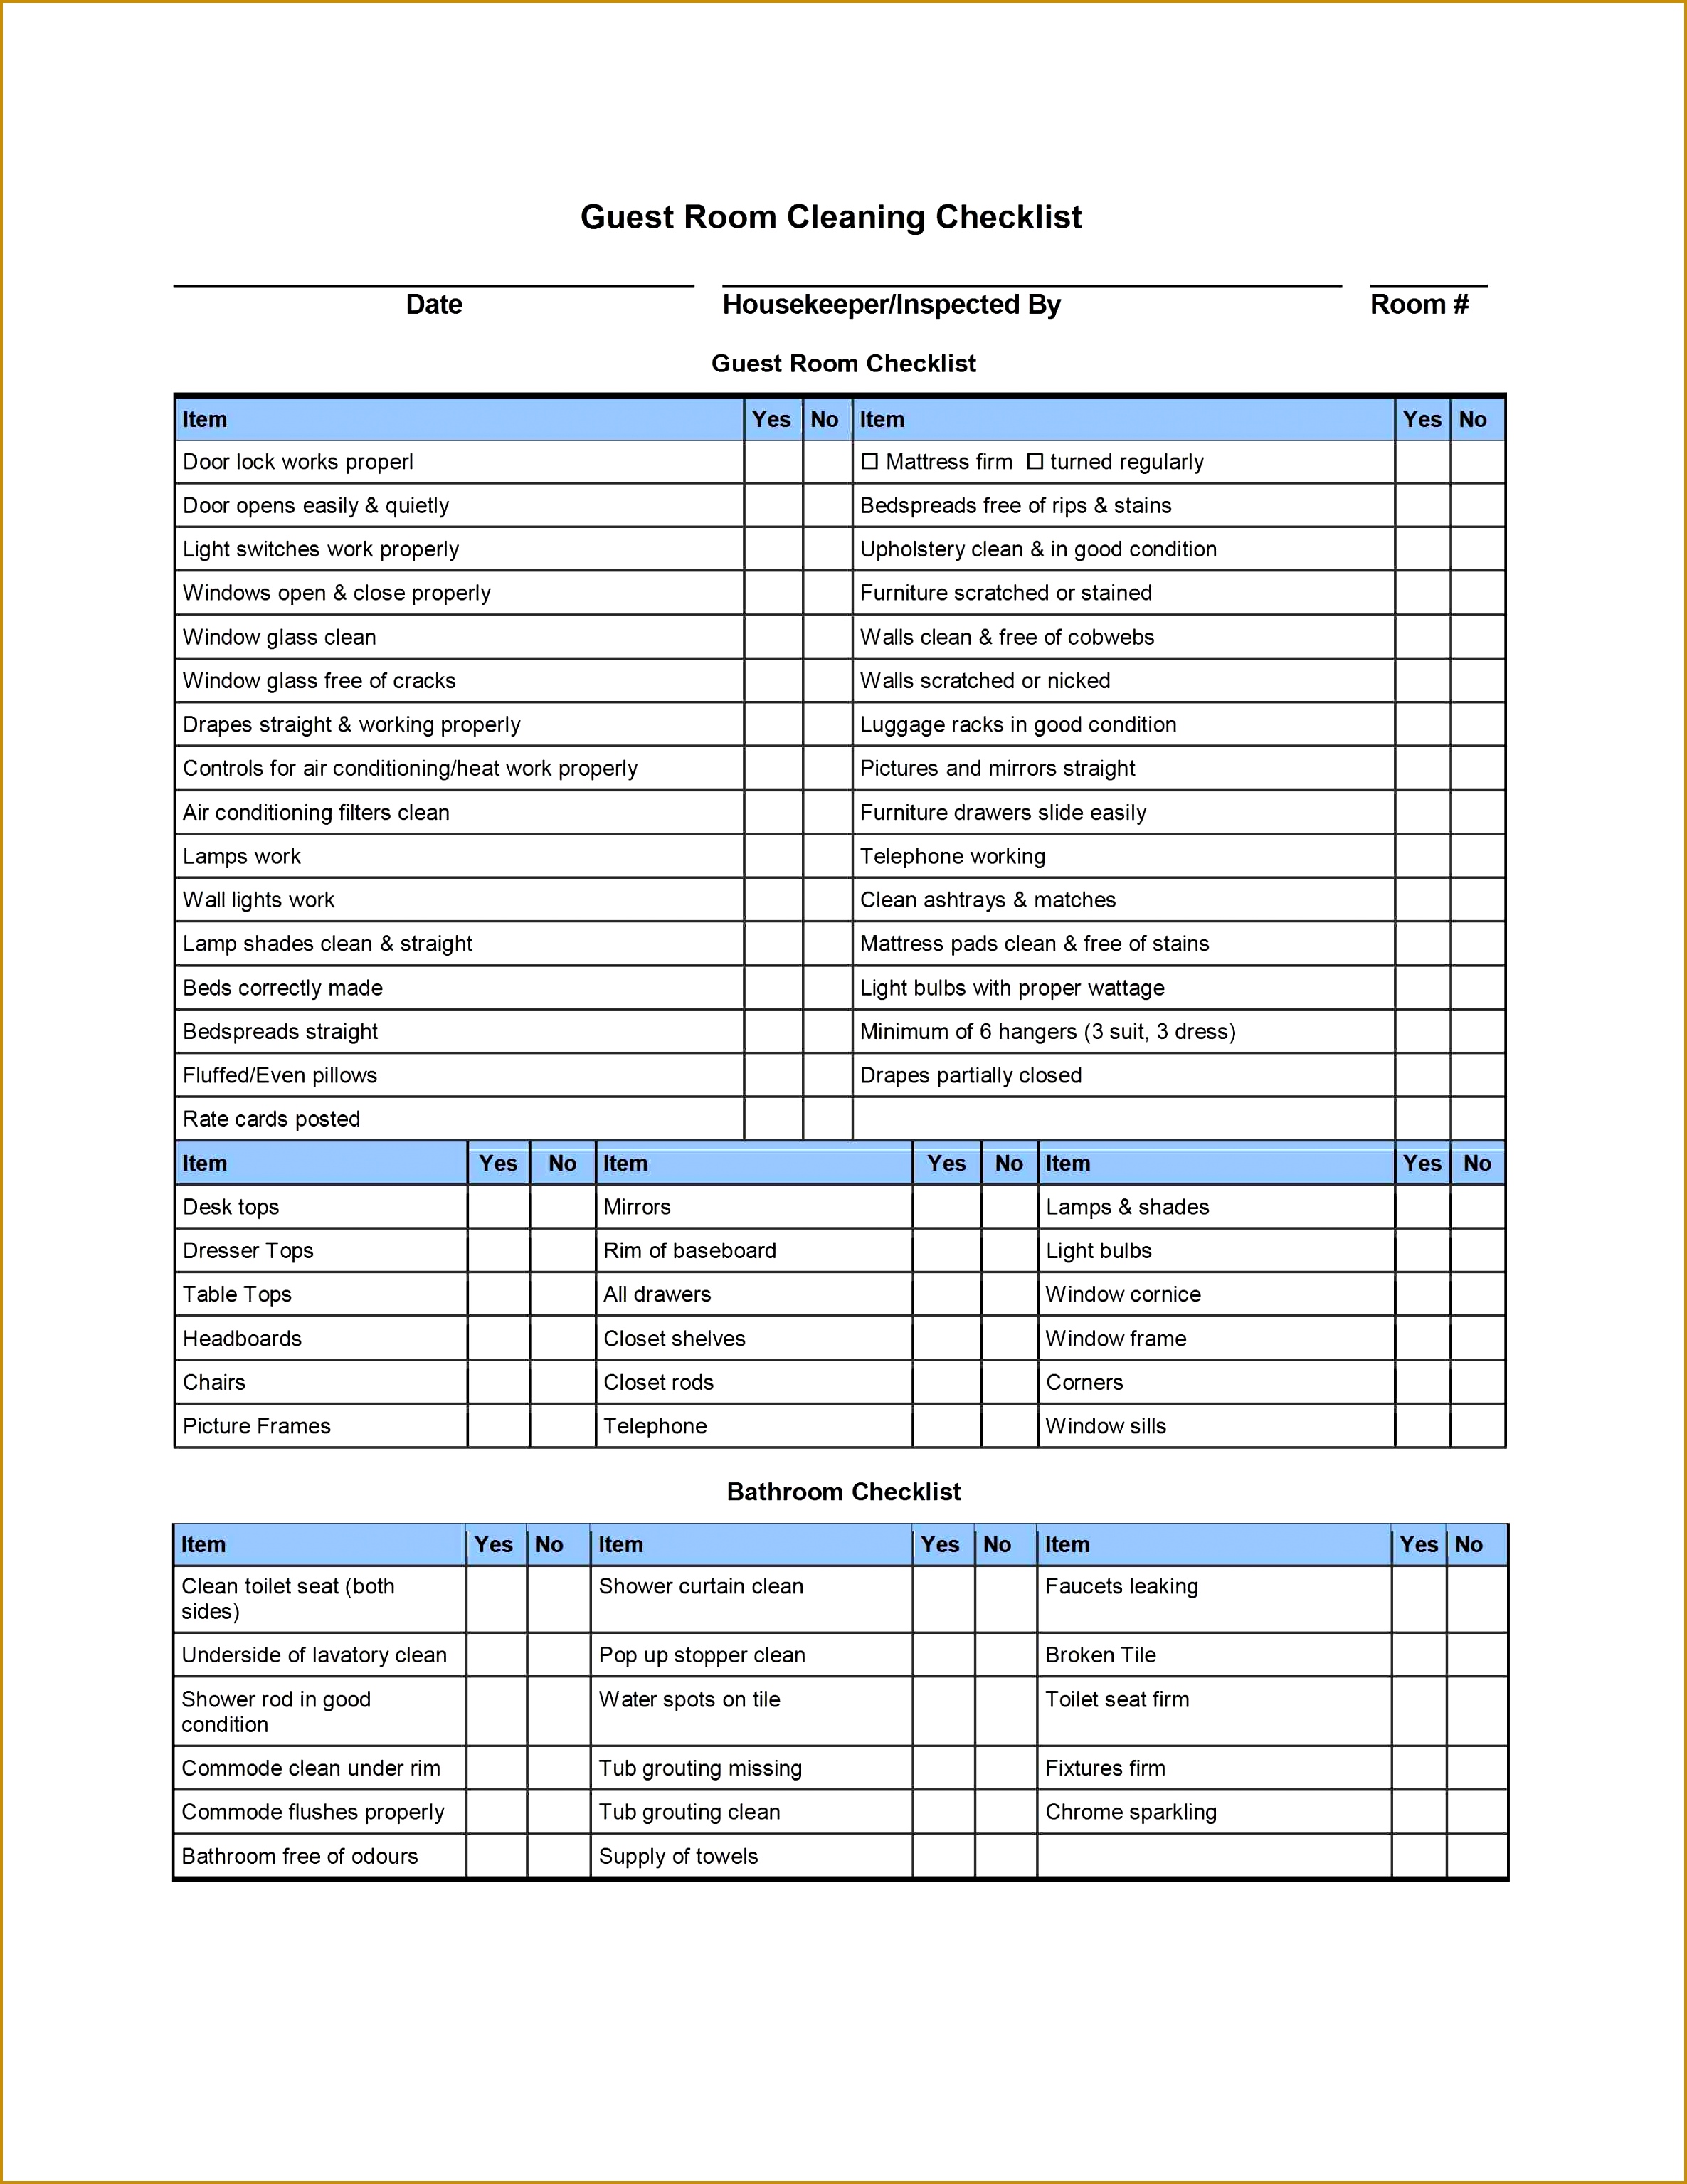 Hotel Room Cleaning Checklist Templates external house cleaning brisbane 30692371